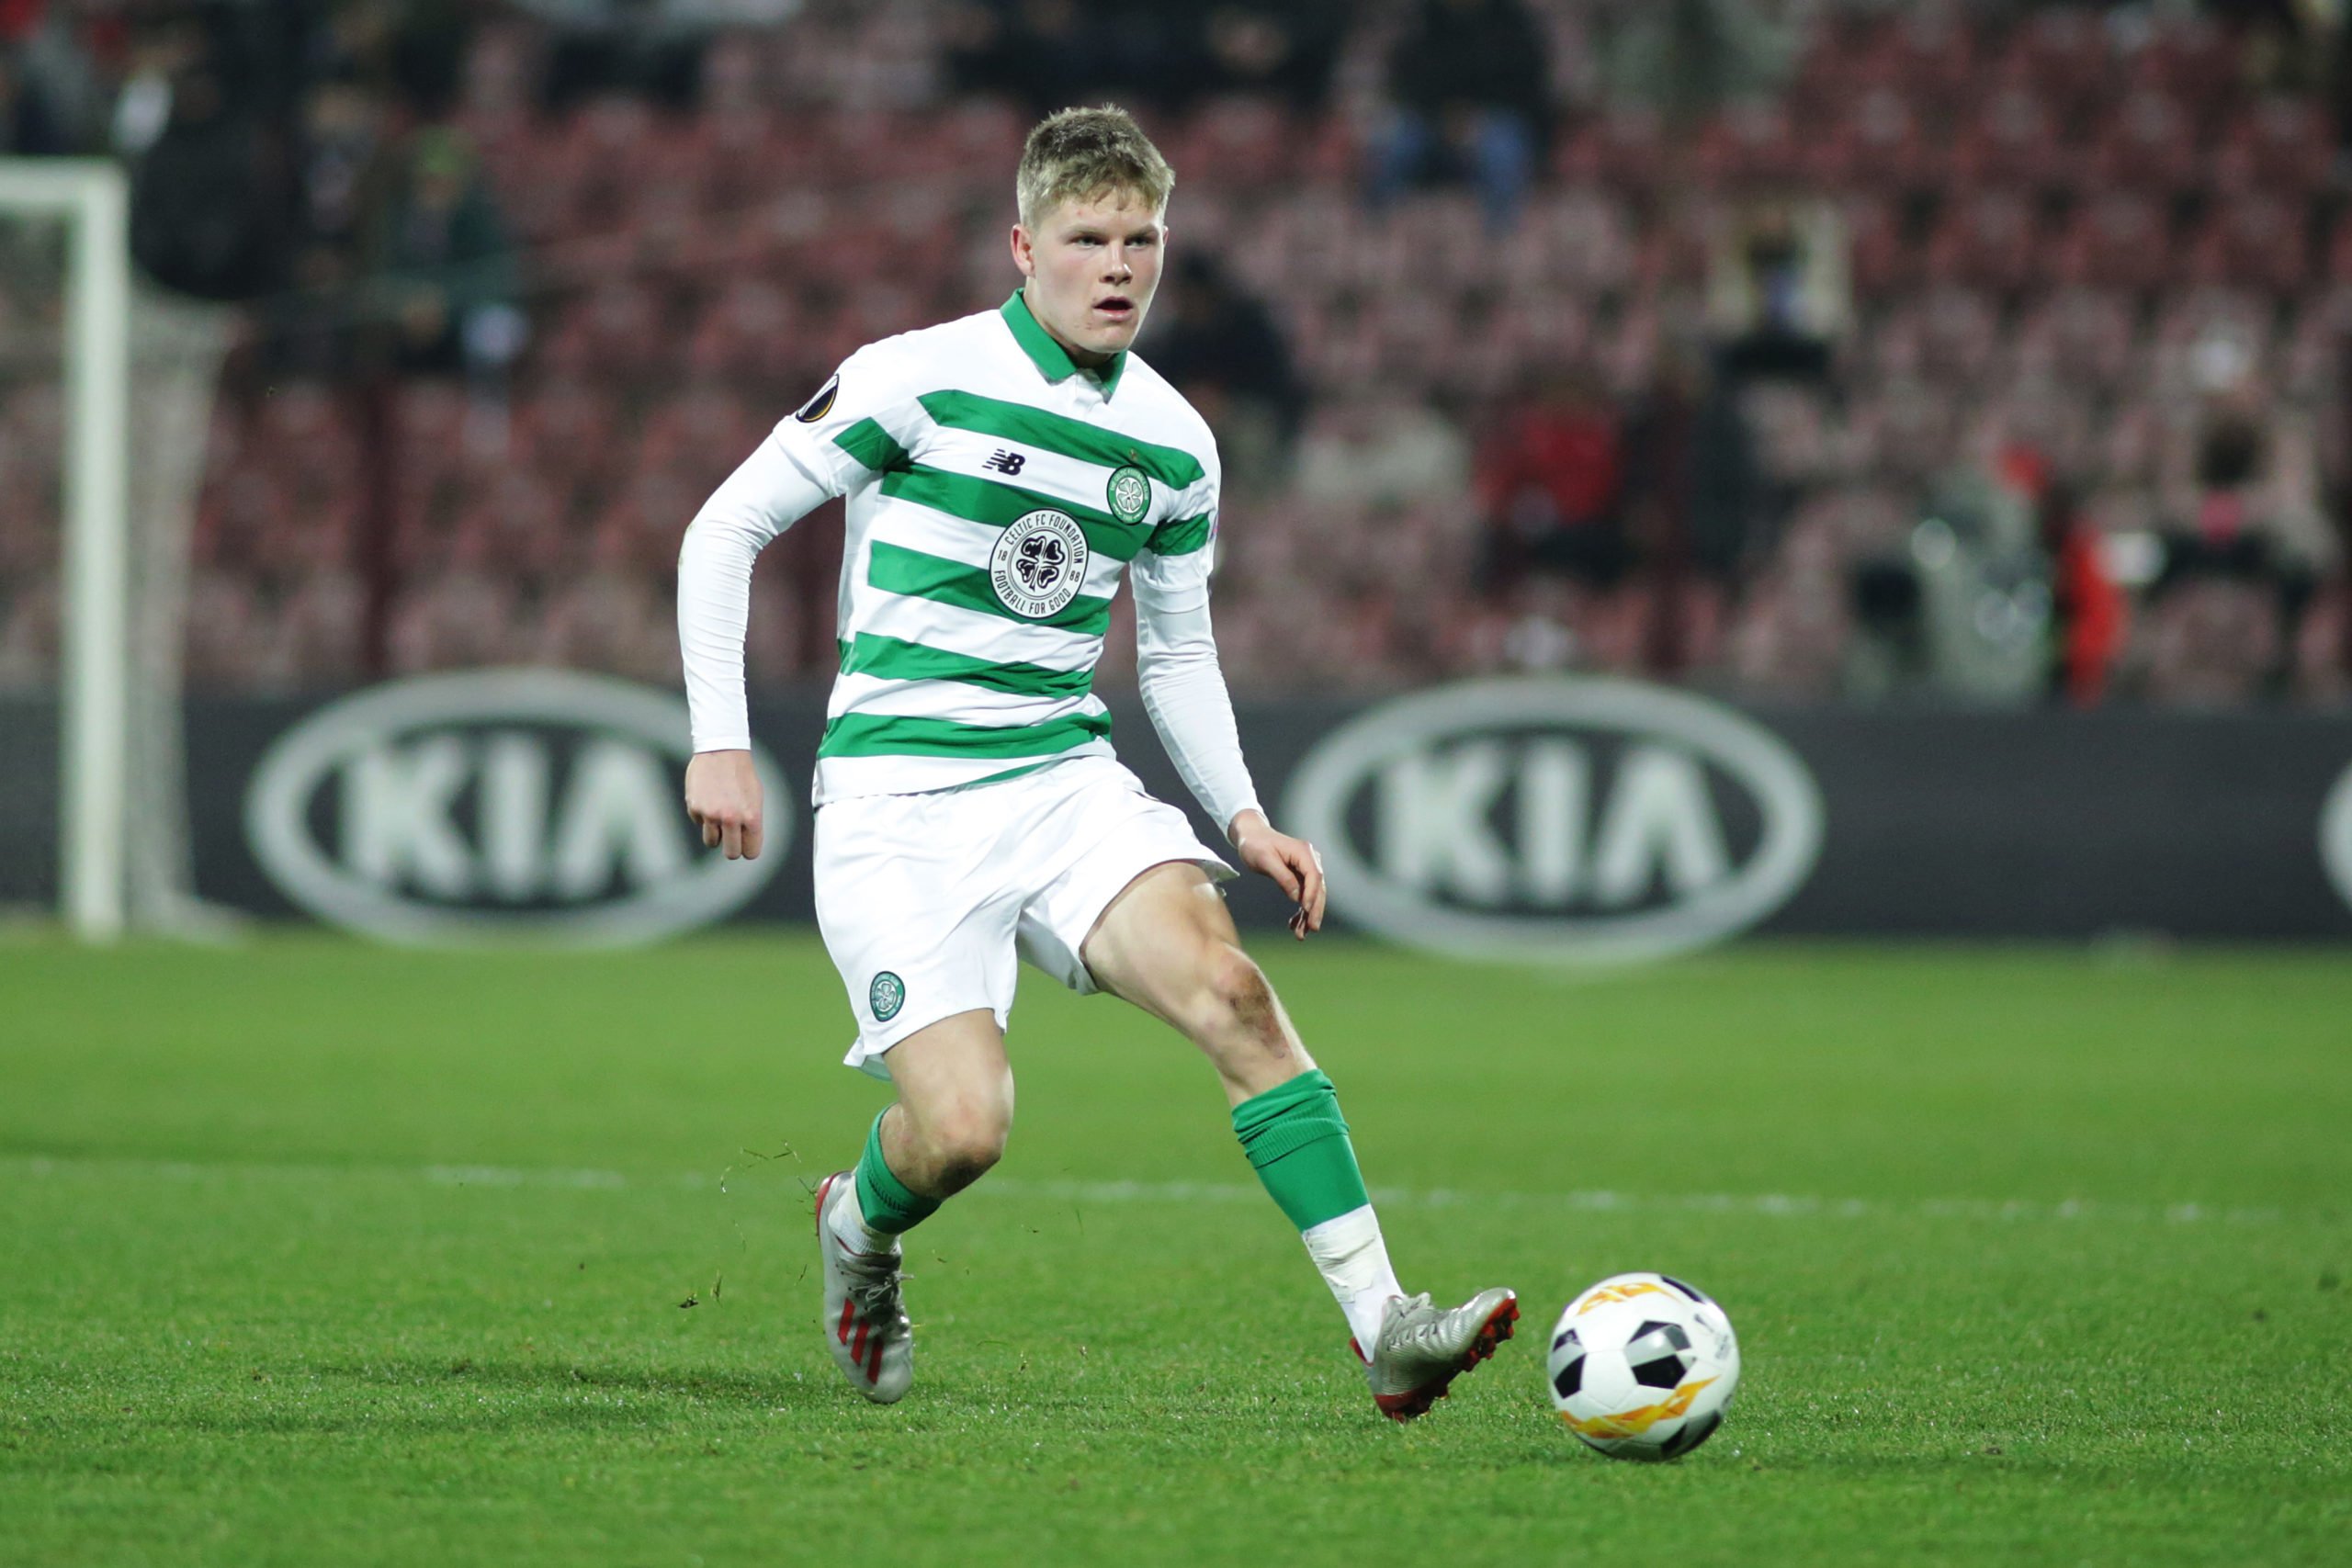 Celtic can't toy with the development of Scott Robertson and others - they deserve better